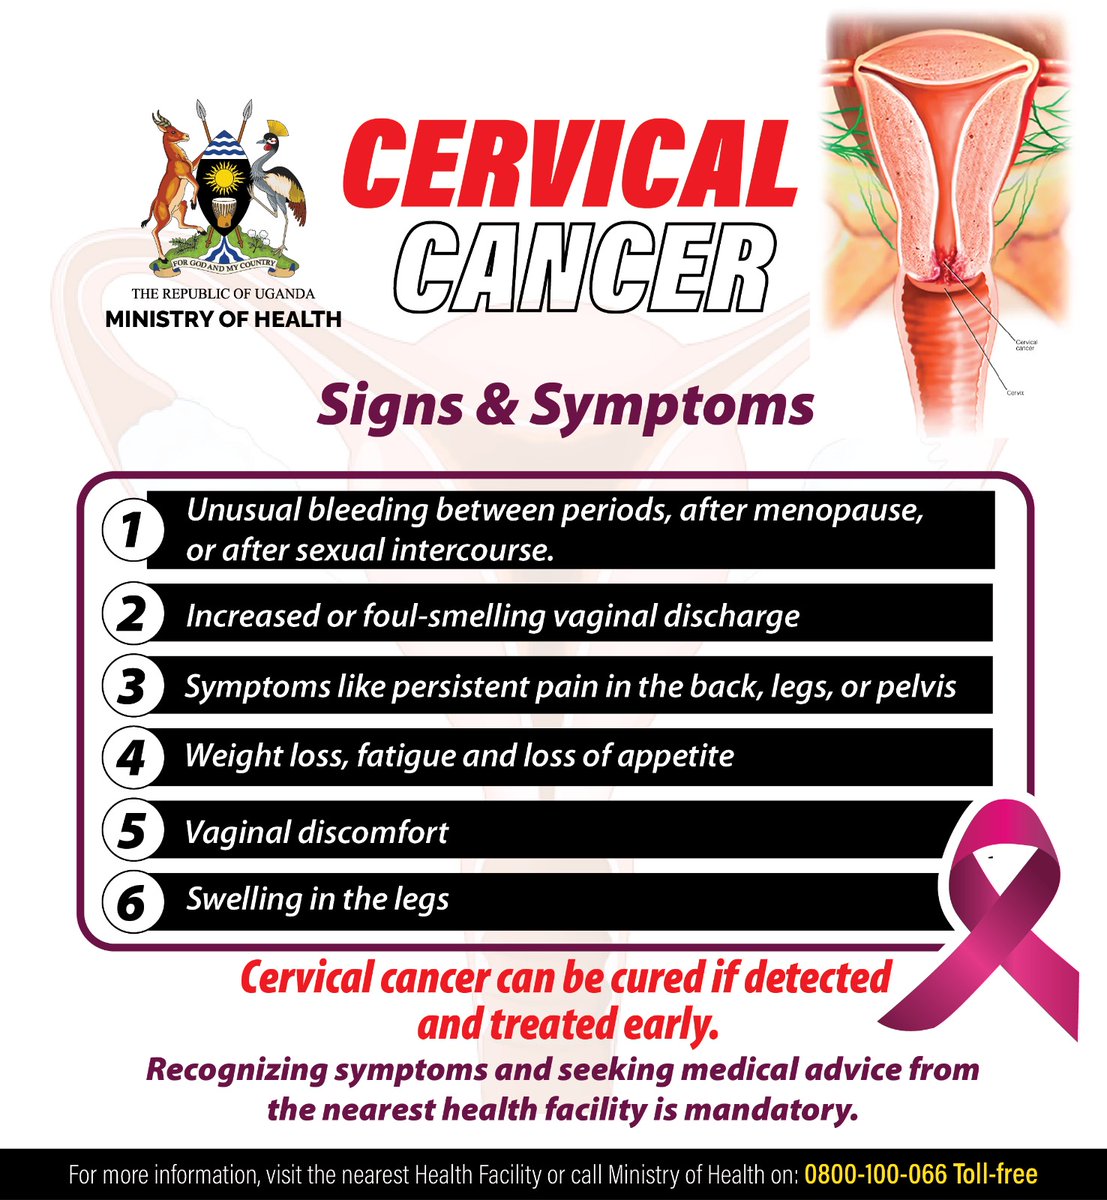 Look out for signs and symptoms of #CervicalCancer.

Cervical Cancer can be cured if detected and treated early.

#CervicalHealthAwarenessMonth